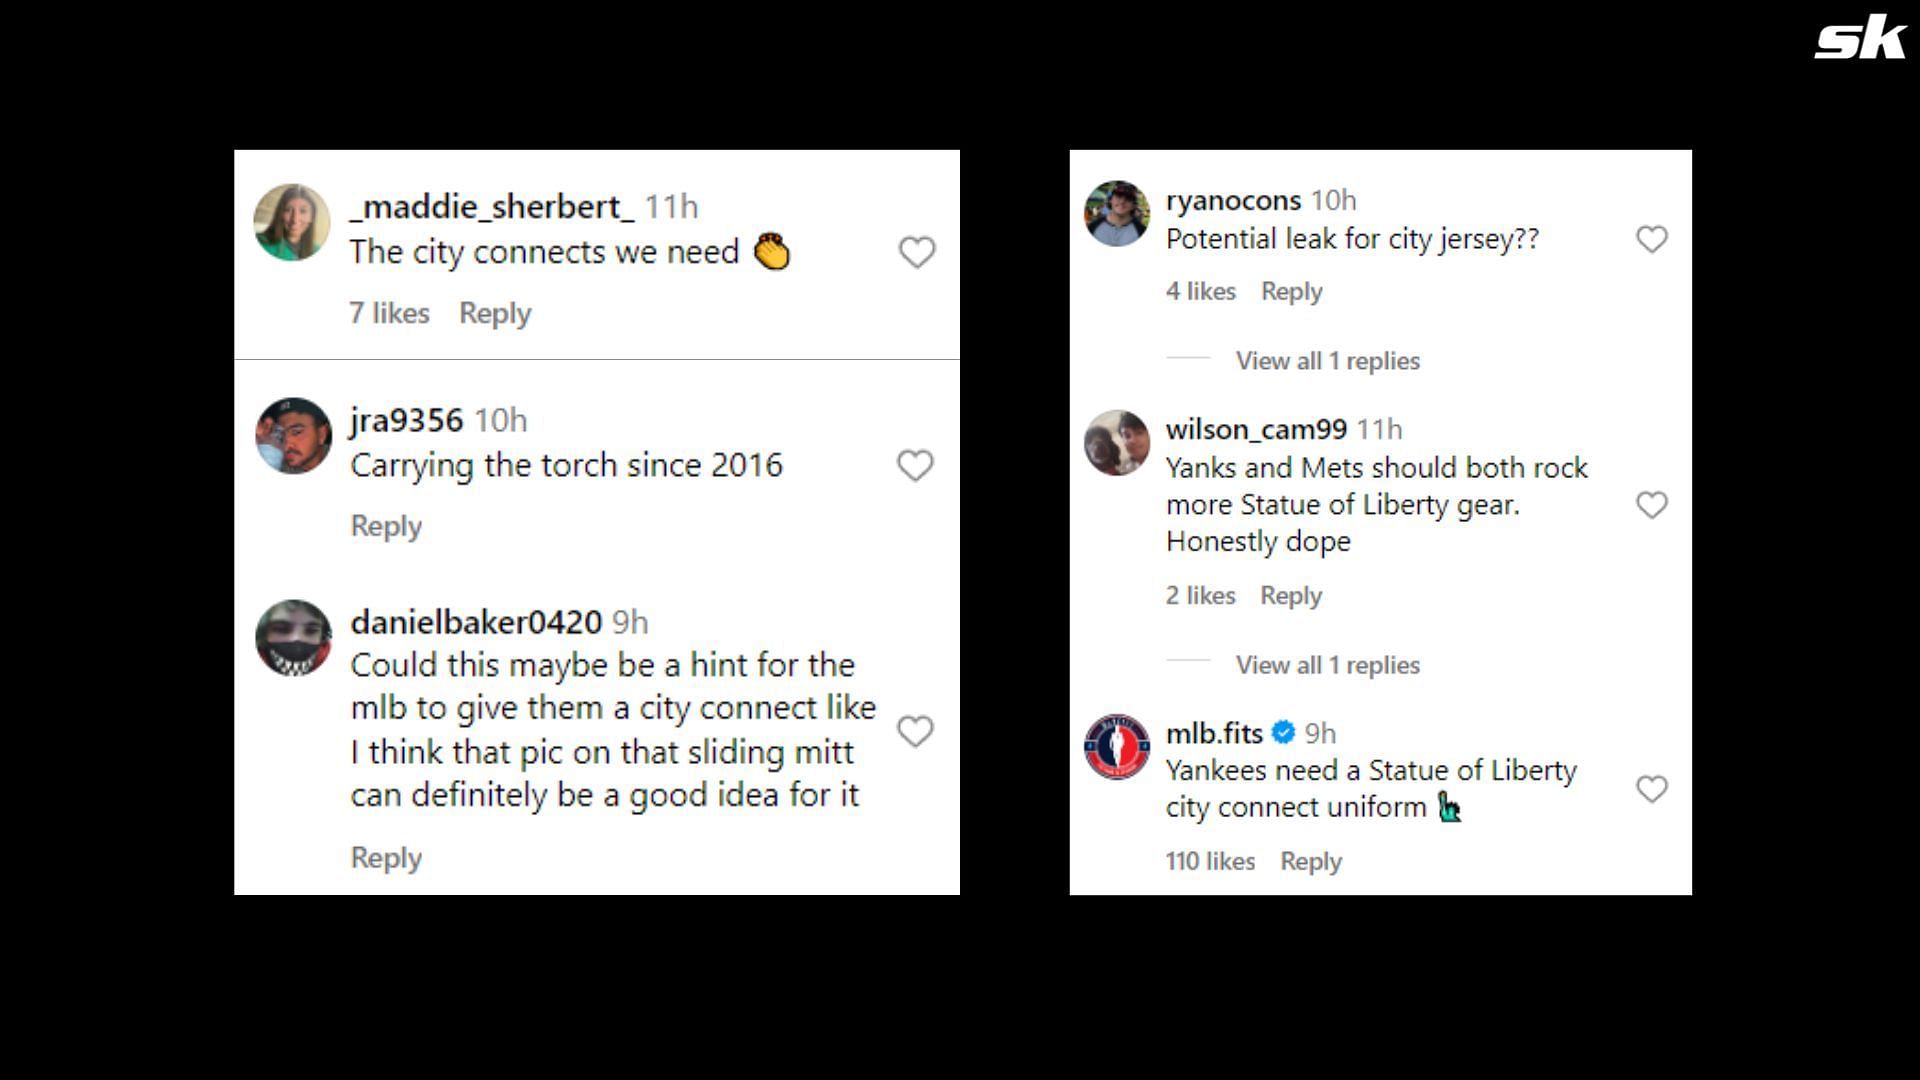 Fan reactions speculating a leak for the NY Yankees city connect jersey